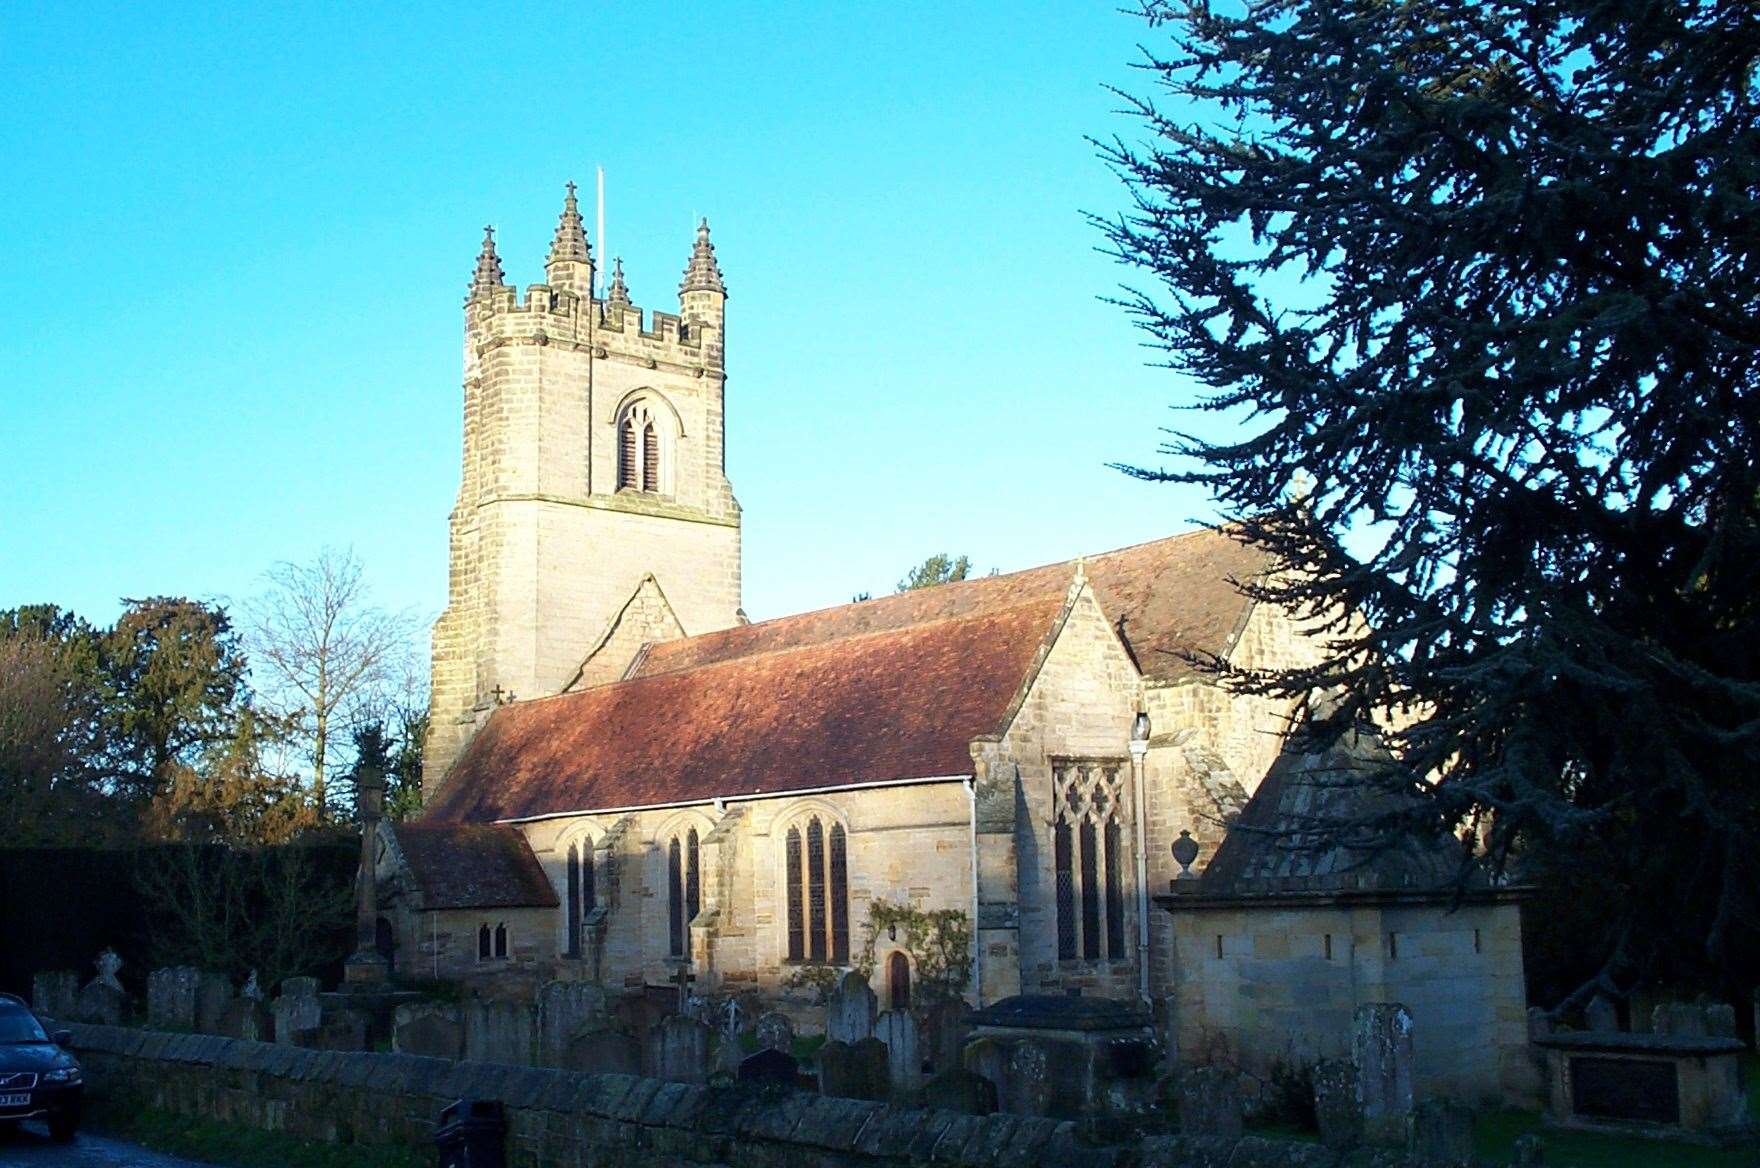 St Mary the Virgin Church, Chiddingstone - where Dermot O'Leary tied the knot